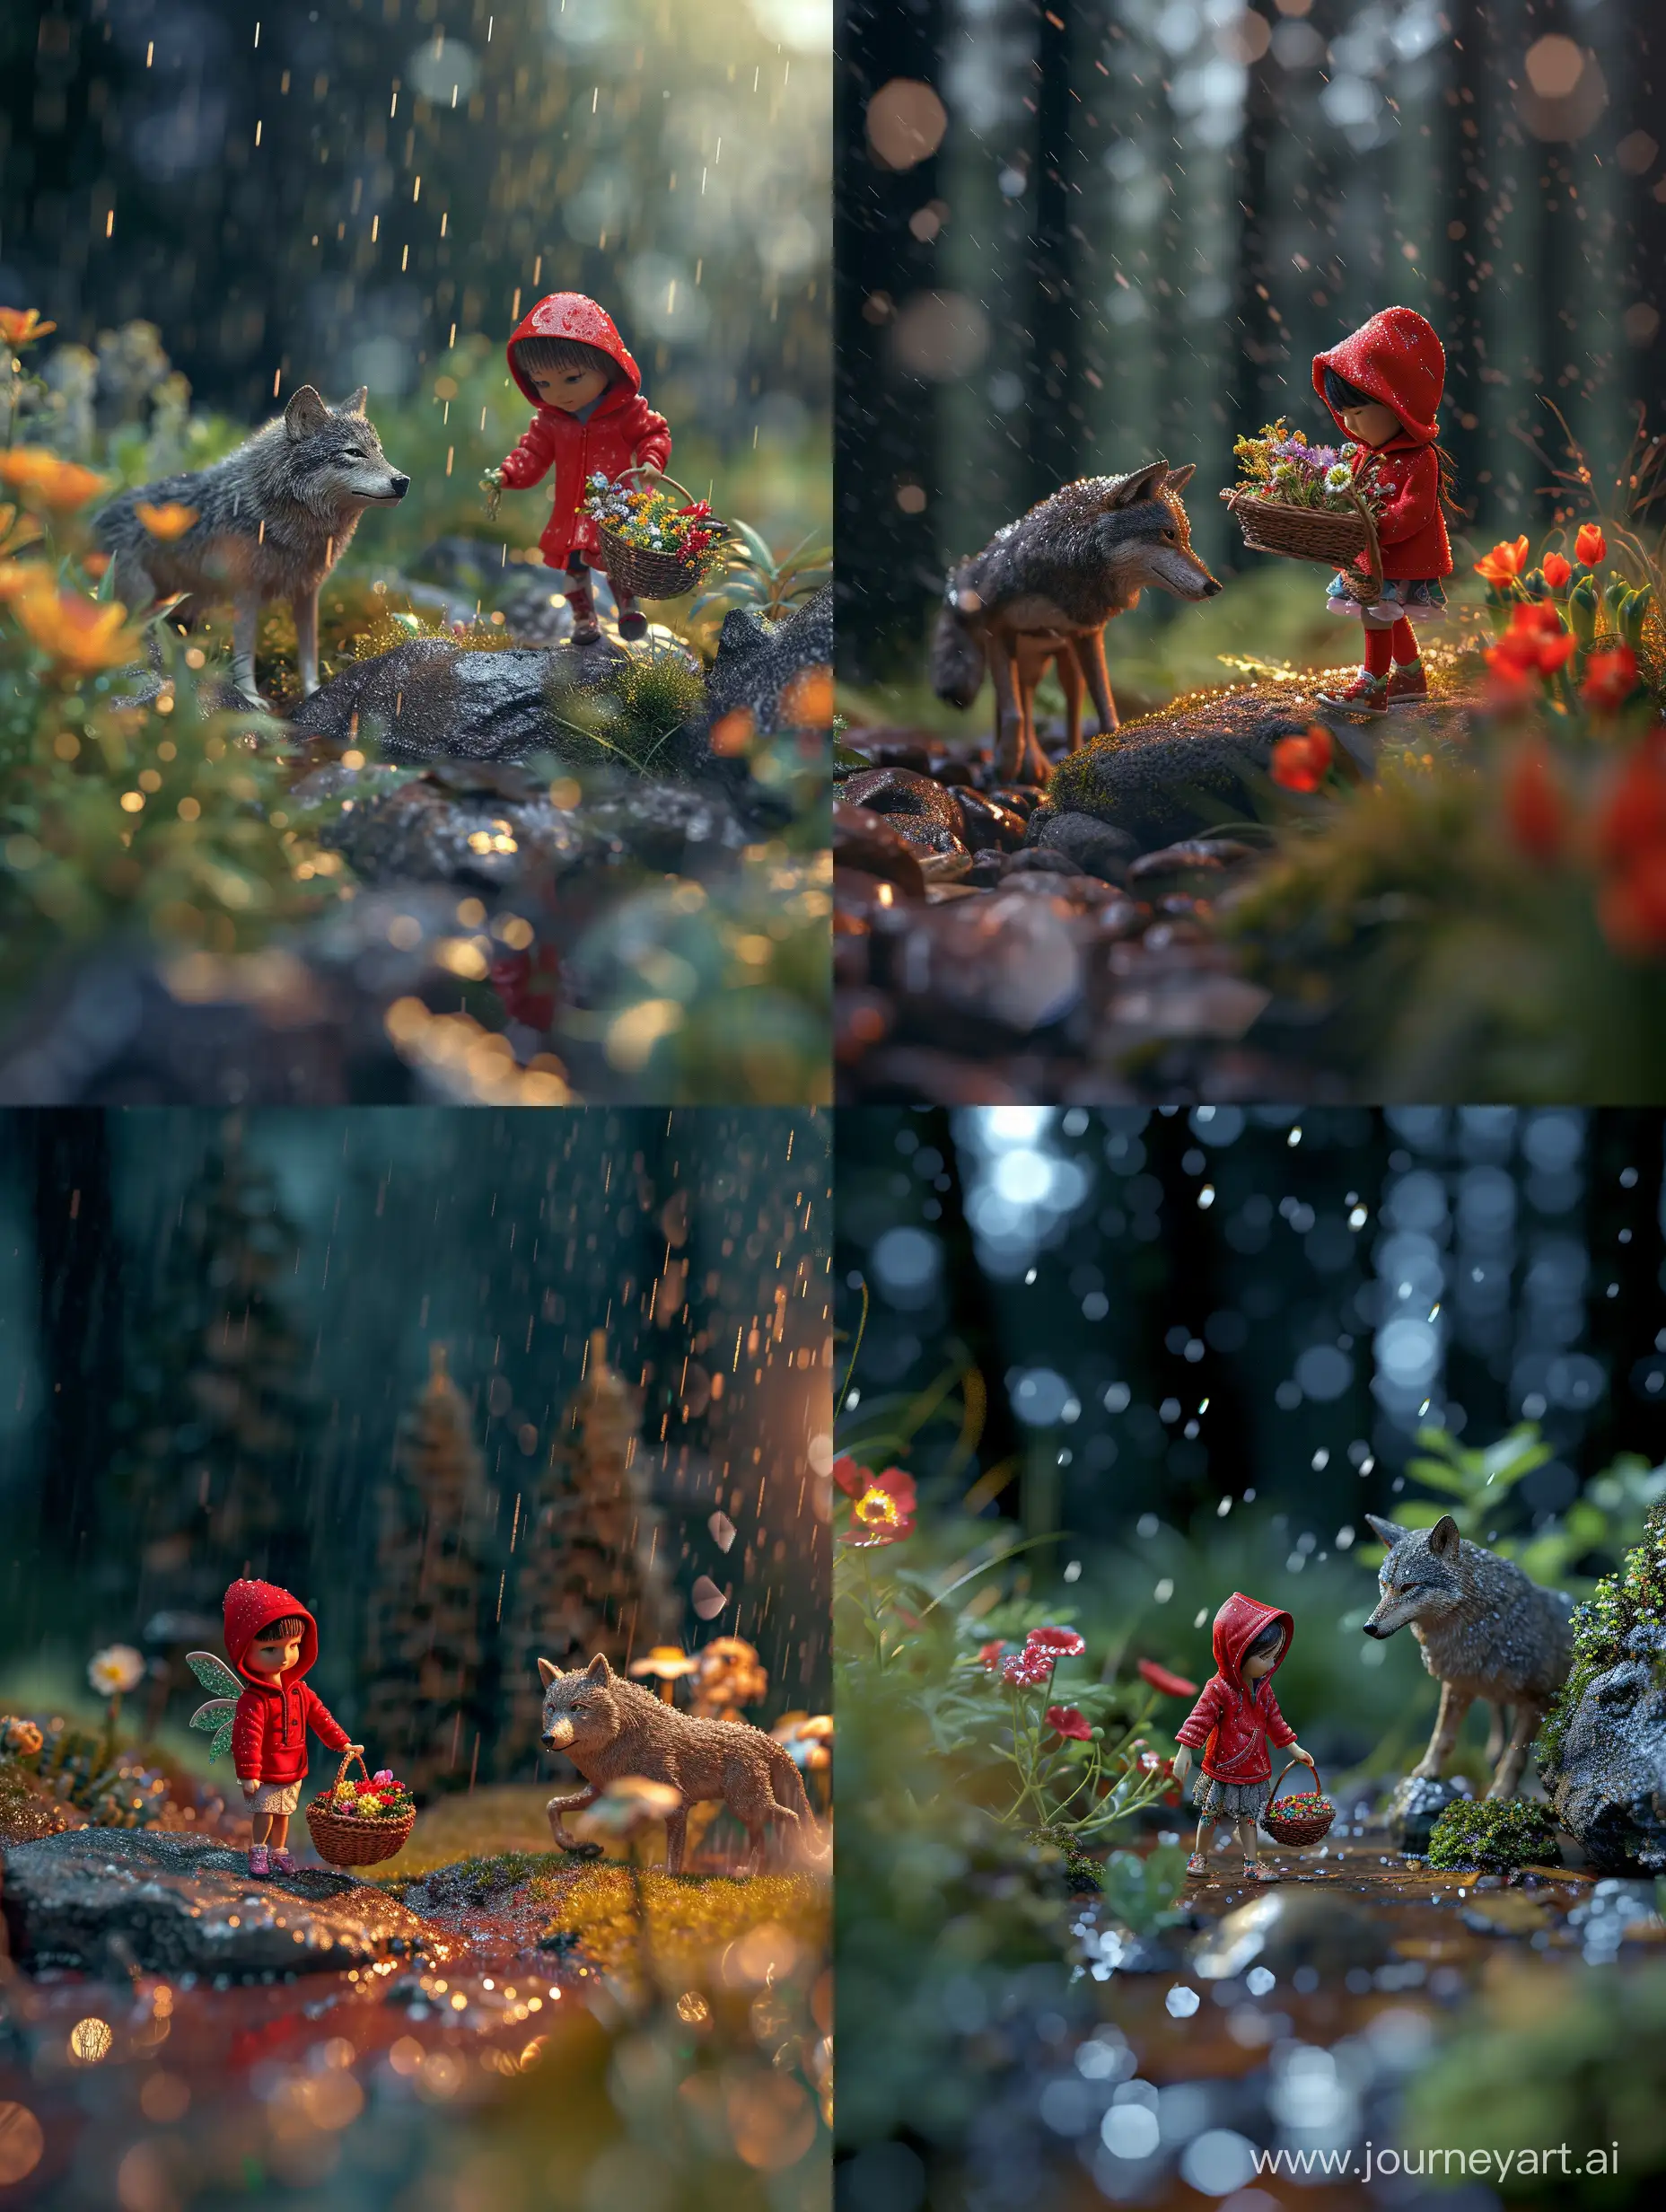 Enchanting-Night-Miniature-Girl-in-Red-Hoodie-with-Flower-Basket-in-Fairy-Forest